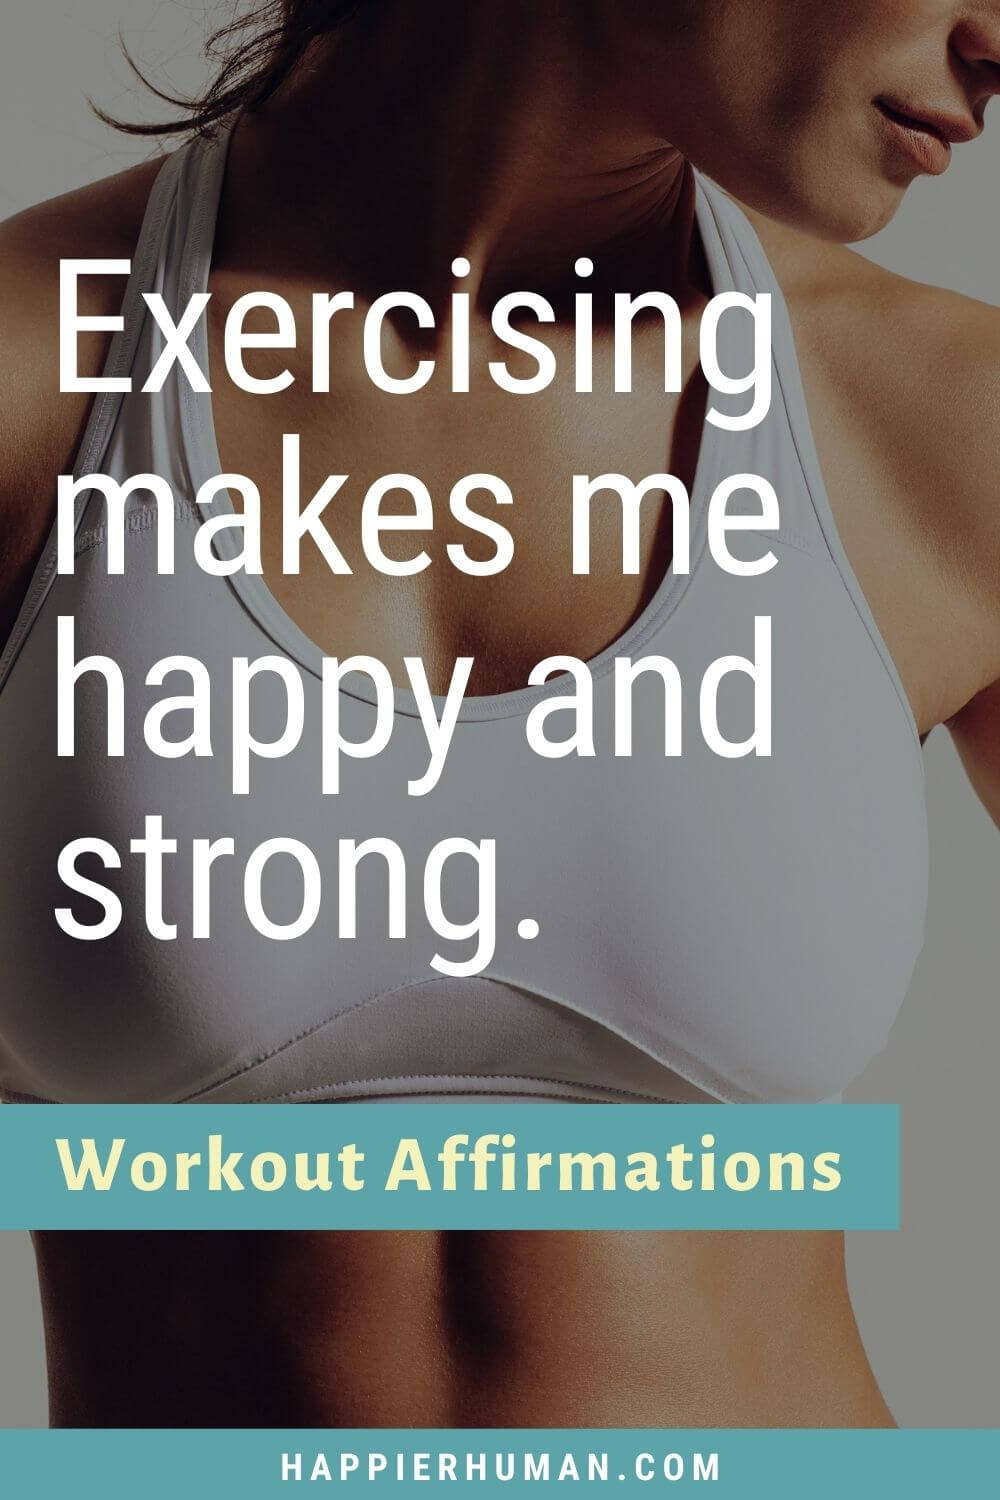 Workout Affirmations - Exercising makes me happy and strong. | post workout affirmations | pre workout affirmations | weight lifting affirmations